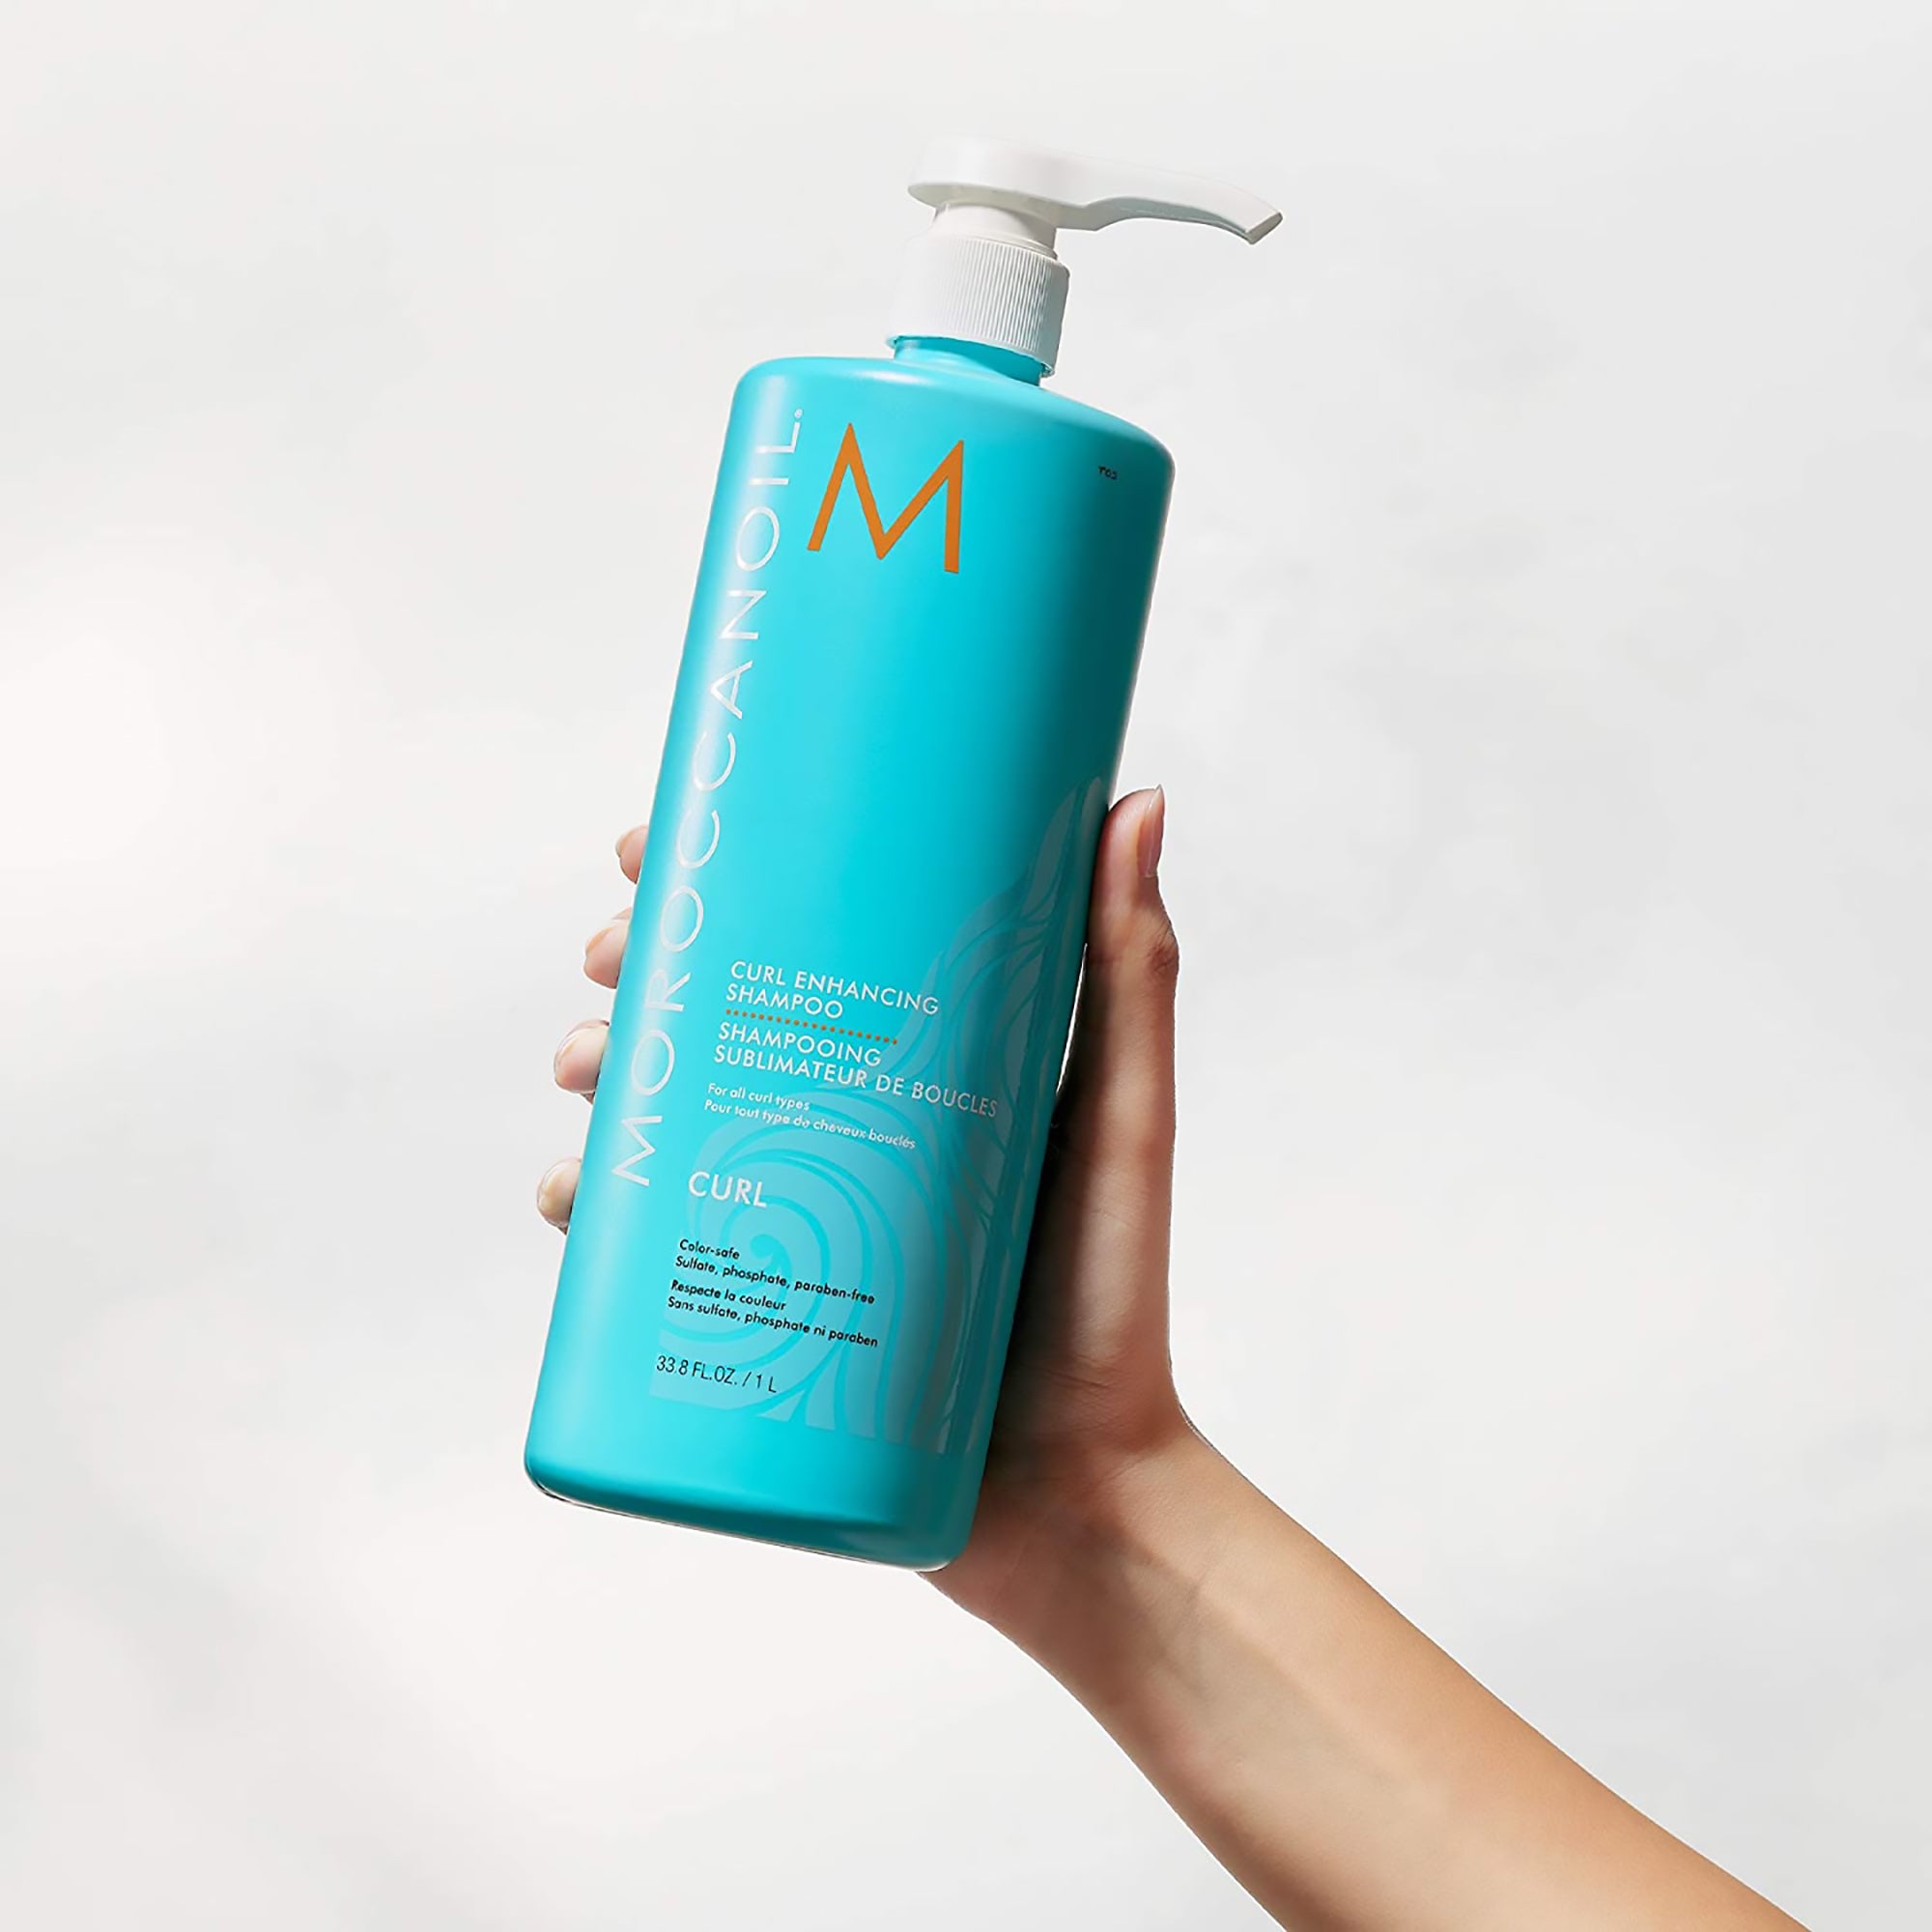 Moroccanoil Curl Enhancing Shampoo and Conditioner Liter Duo / 33OZ